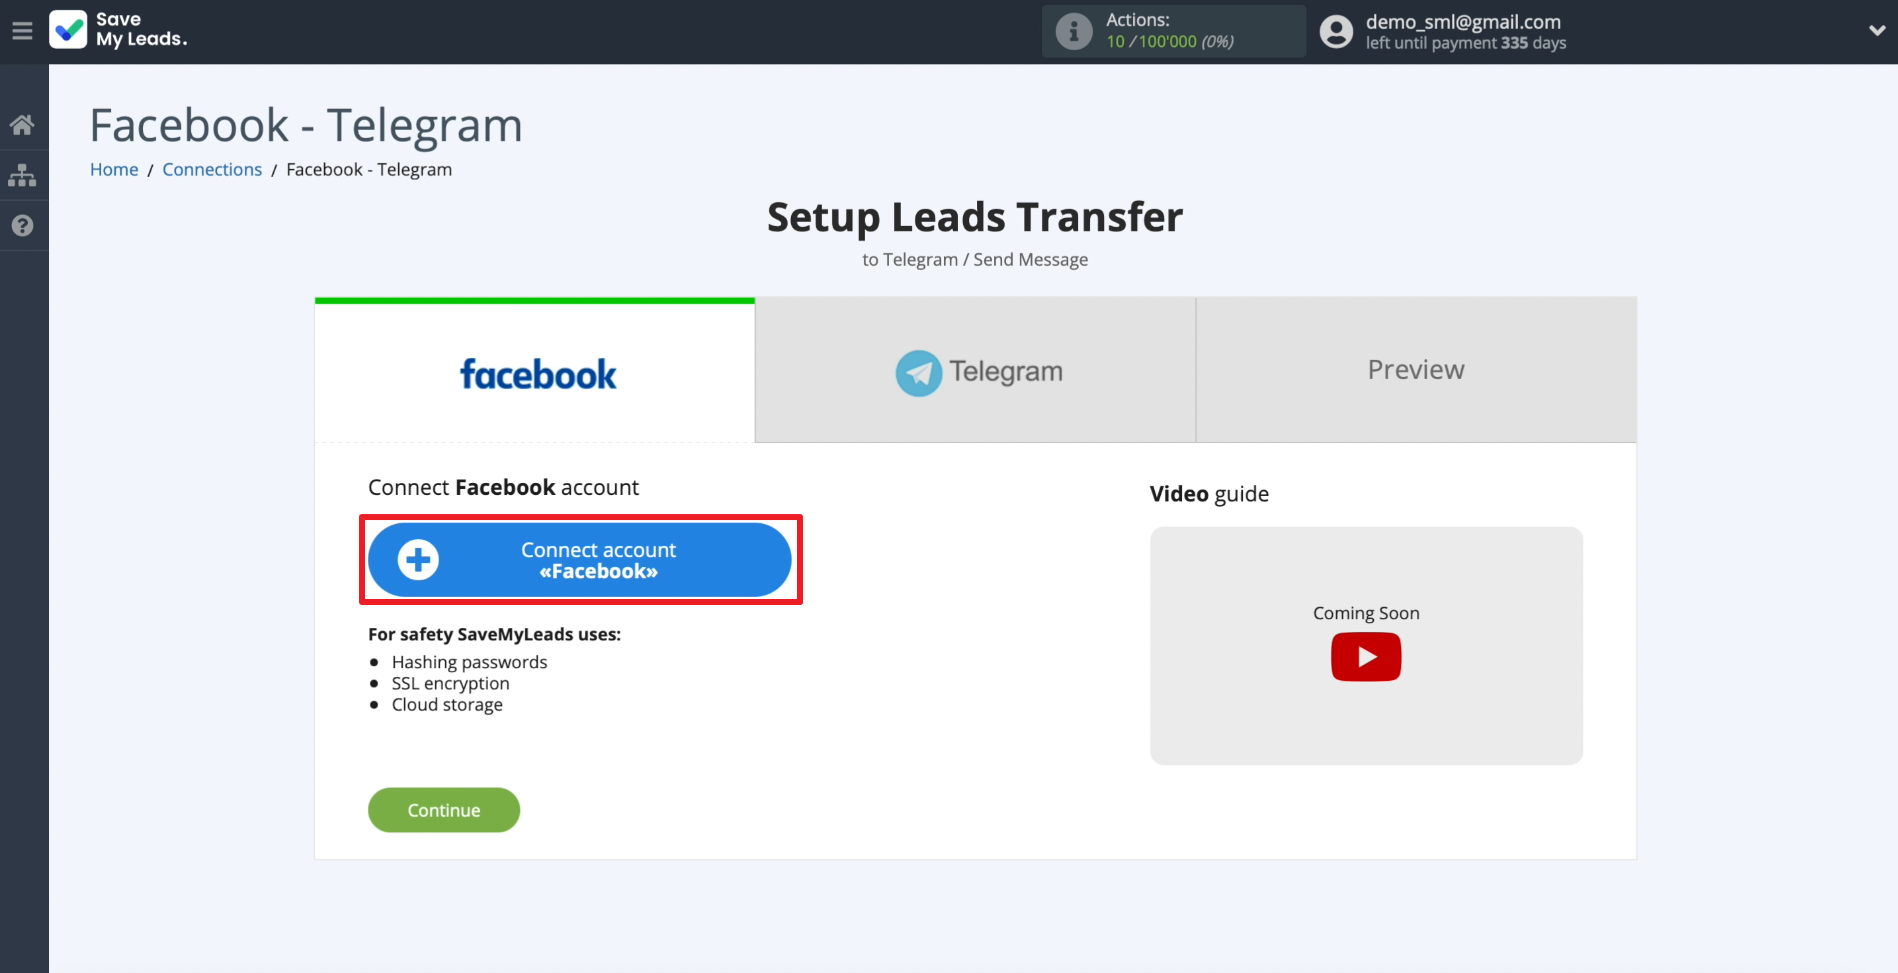 How to set up the upload of new leads from a Facebook advertising account in Telegram | Connect your Facebook profile